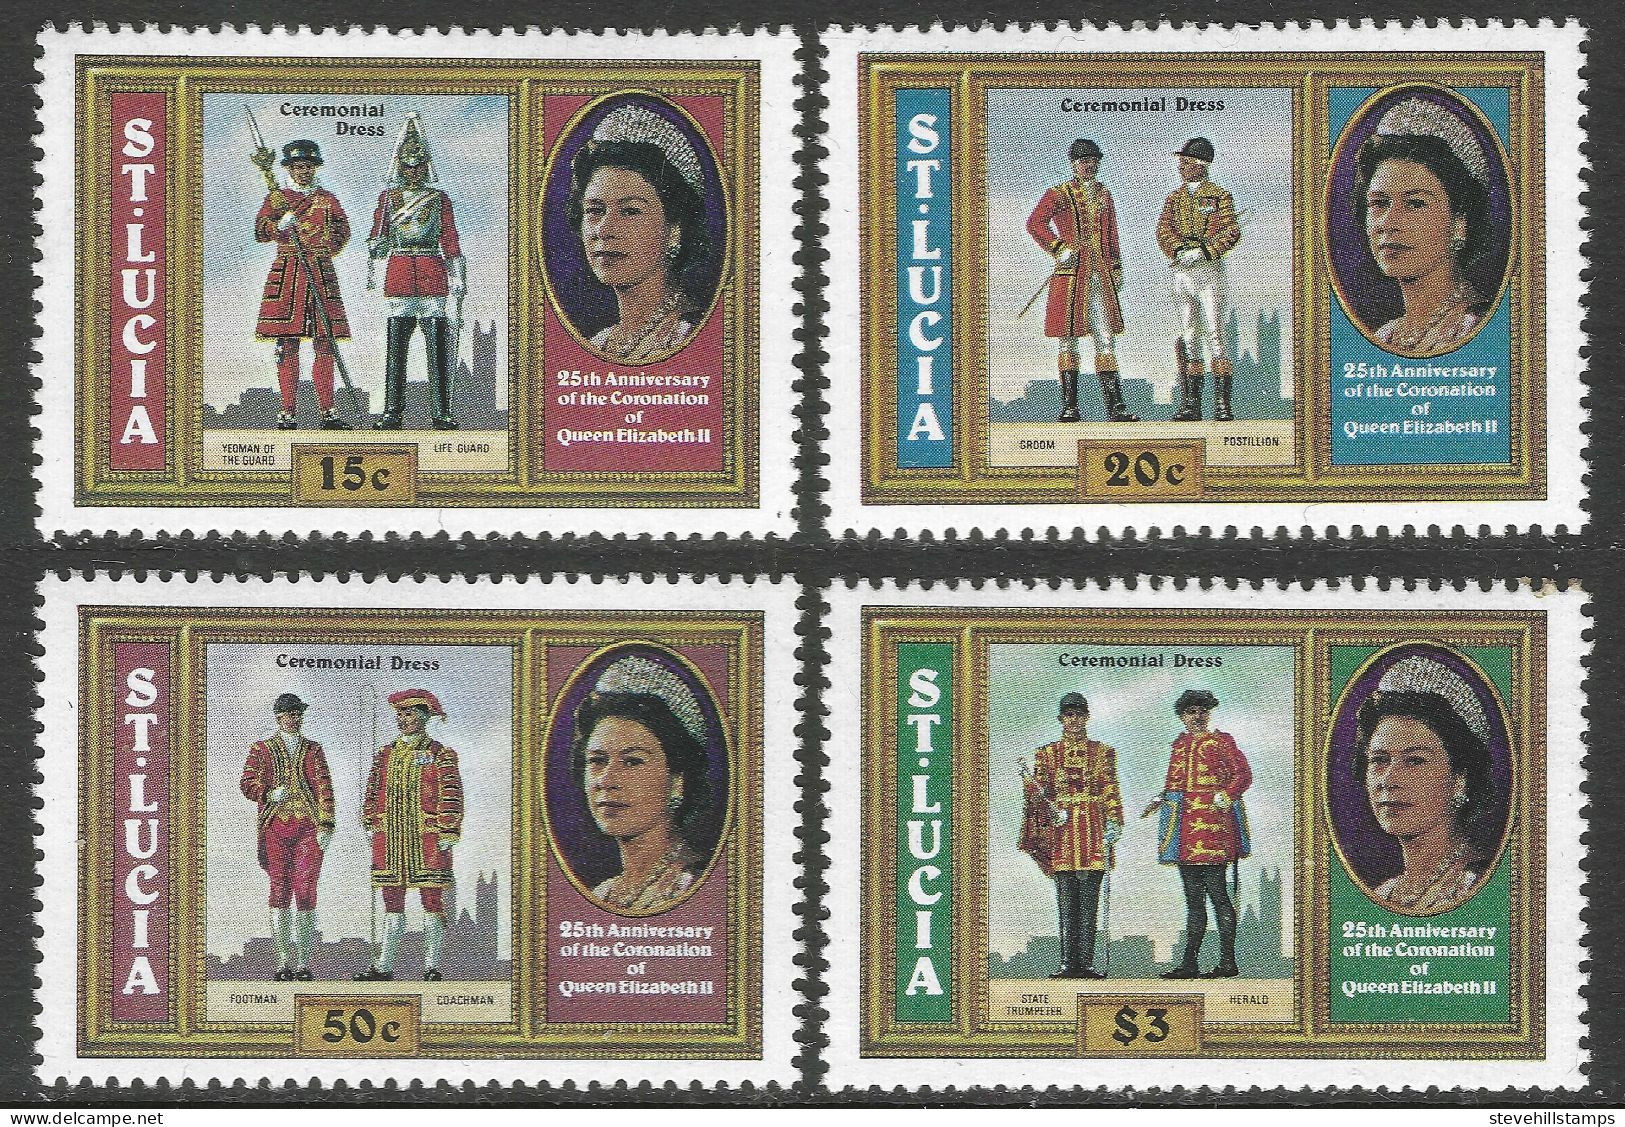 St Lucia. 1978 25th Anniv Of Coronation. MH Complete Set (excl Miniature Sheet). SG 468-471. M3154 - St.Lucia (...-1978)